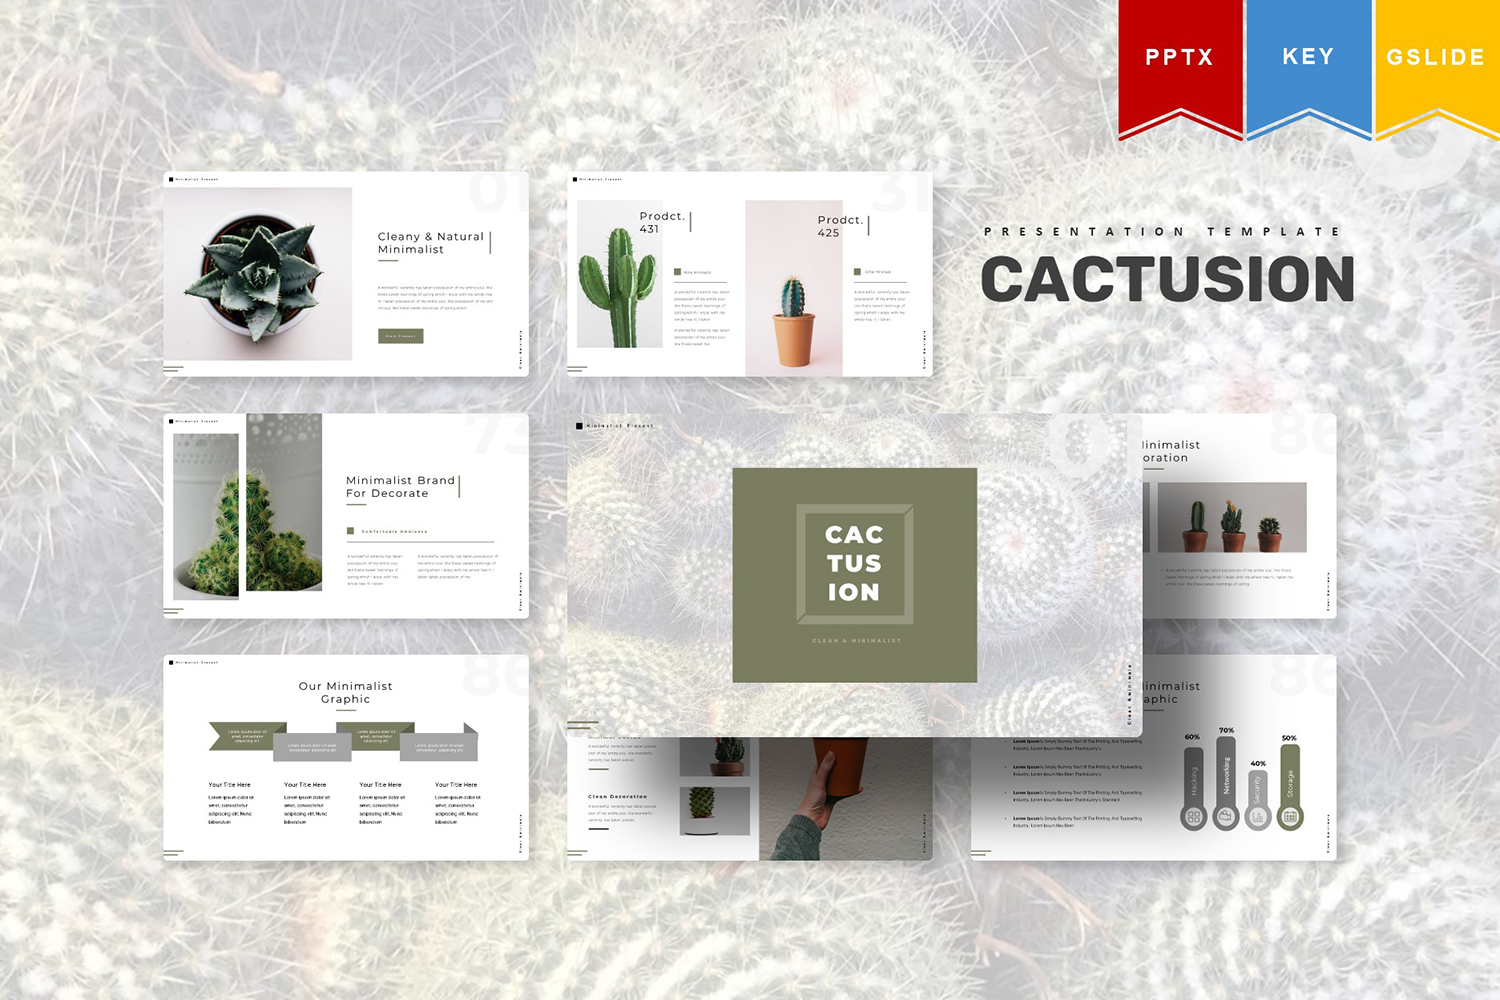 Cactusion | PowerPoint template